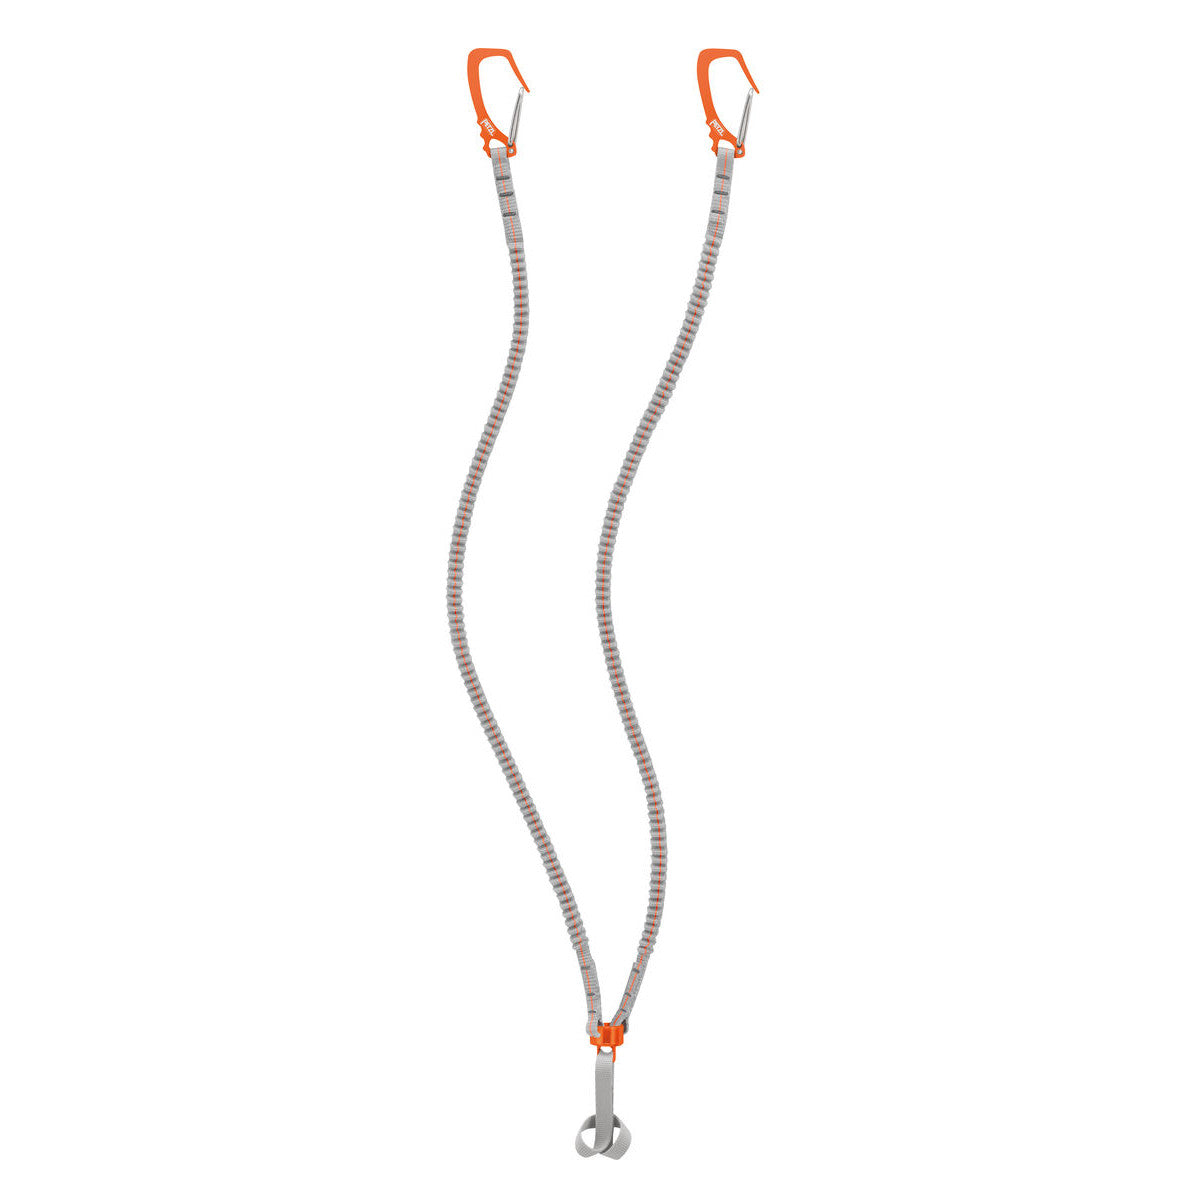 Petzl V-Link Leash shown with 2 orange carabiners